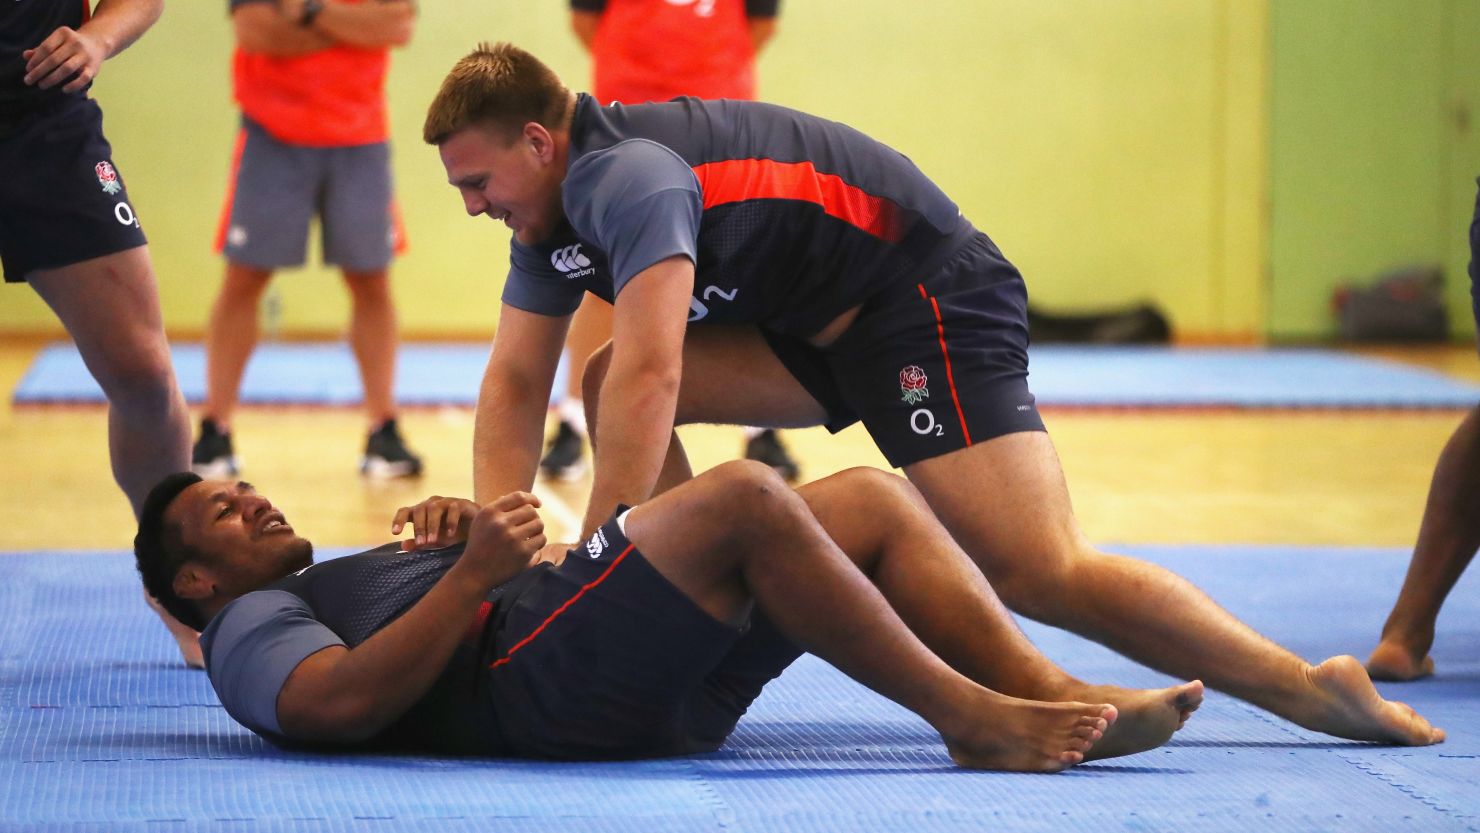 Mako Vunipola is held down by England teammate Paul Hill during a judo session.